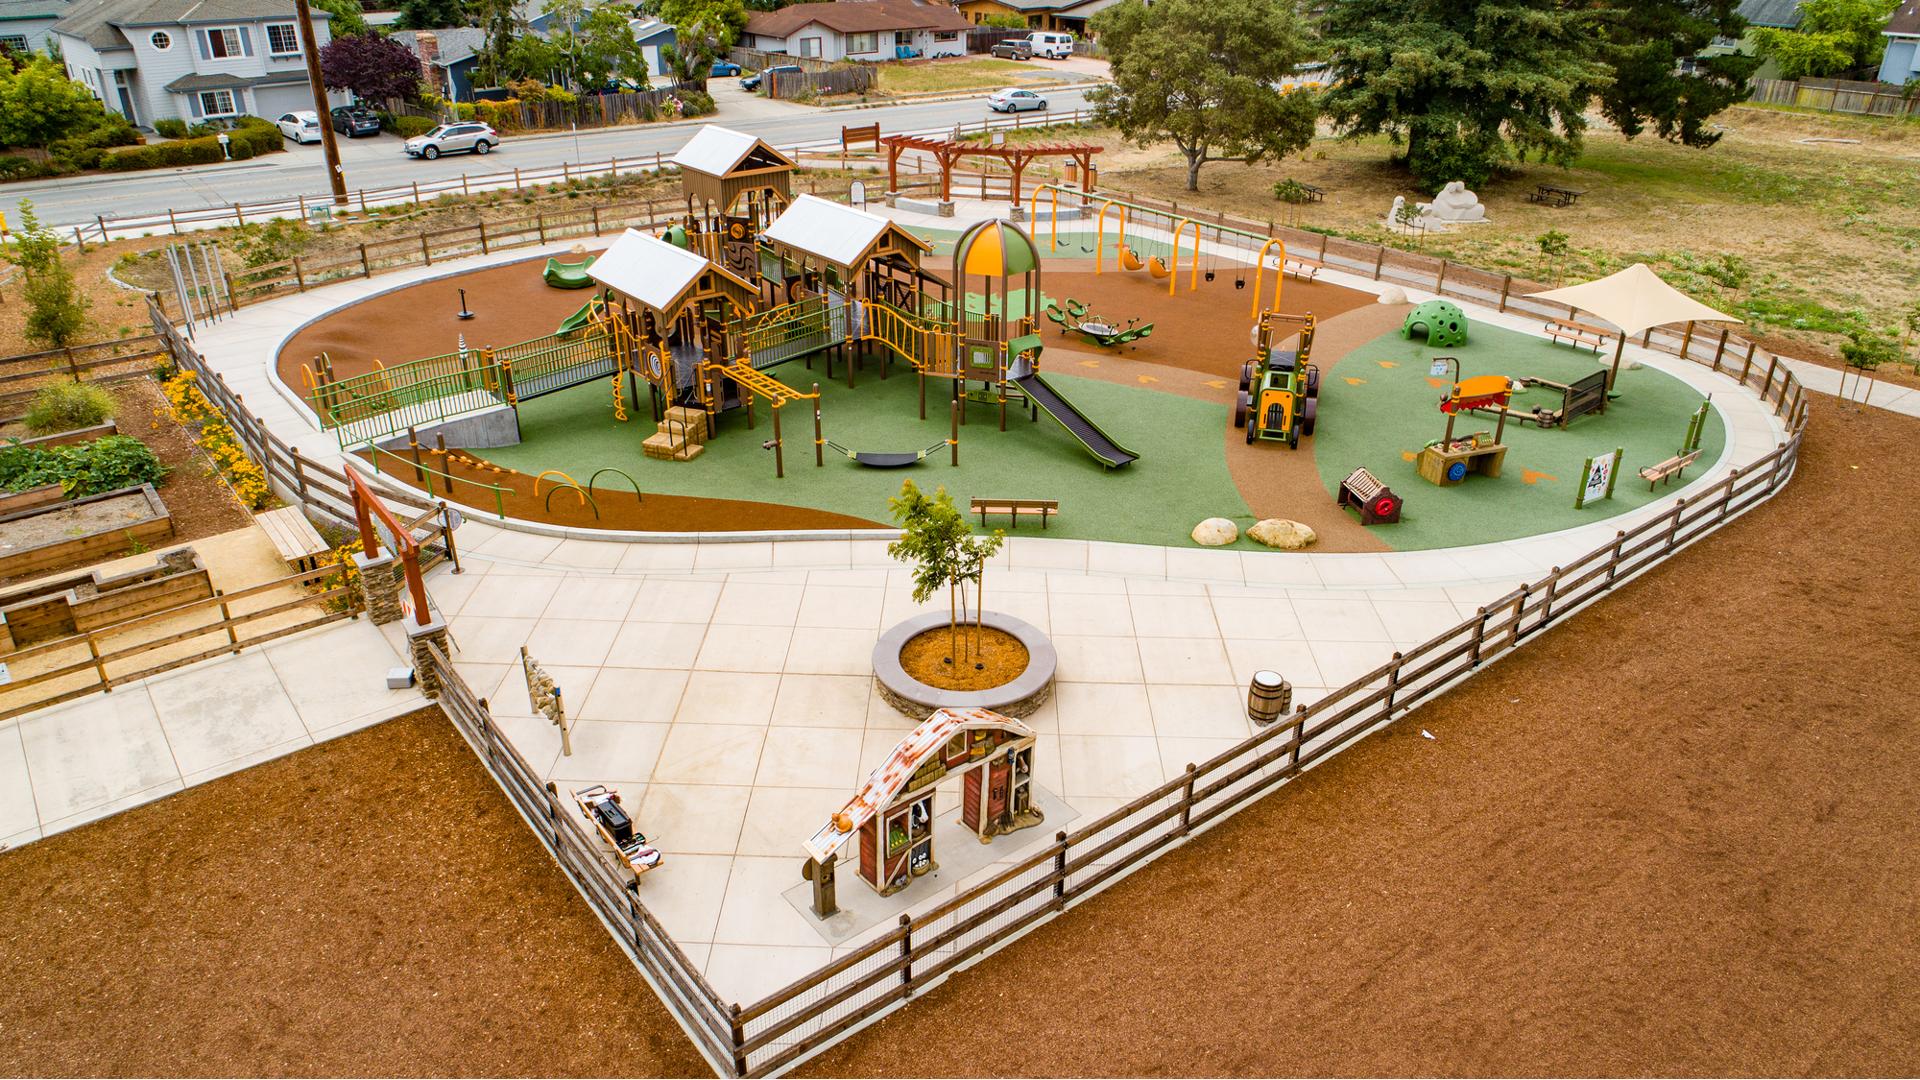 LEO's Haven at Chanticleer County Park Santa Cruz, CA in partnership with Inclusion Matters® by Shane’s Inspiration features a PlayBooster® play structure and concrete farmer's market and animal farm, and barn-themed sensory wall.